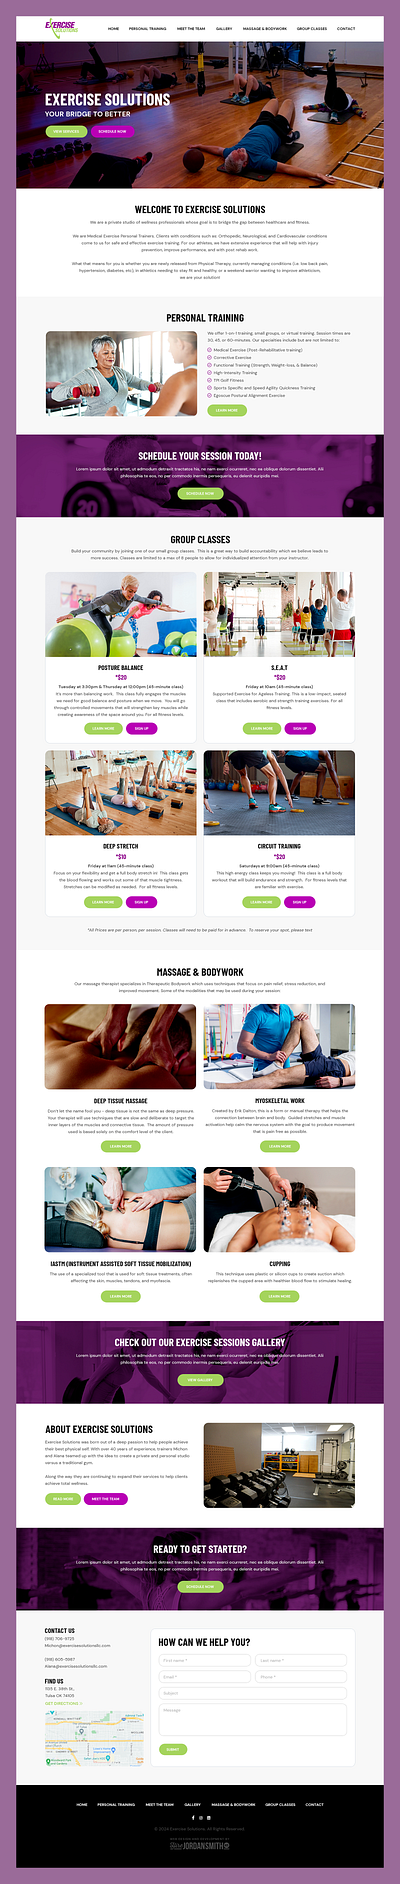 Exercise Solutions // Web Design exercise fitness health health fitness personal training training center web design